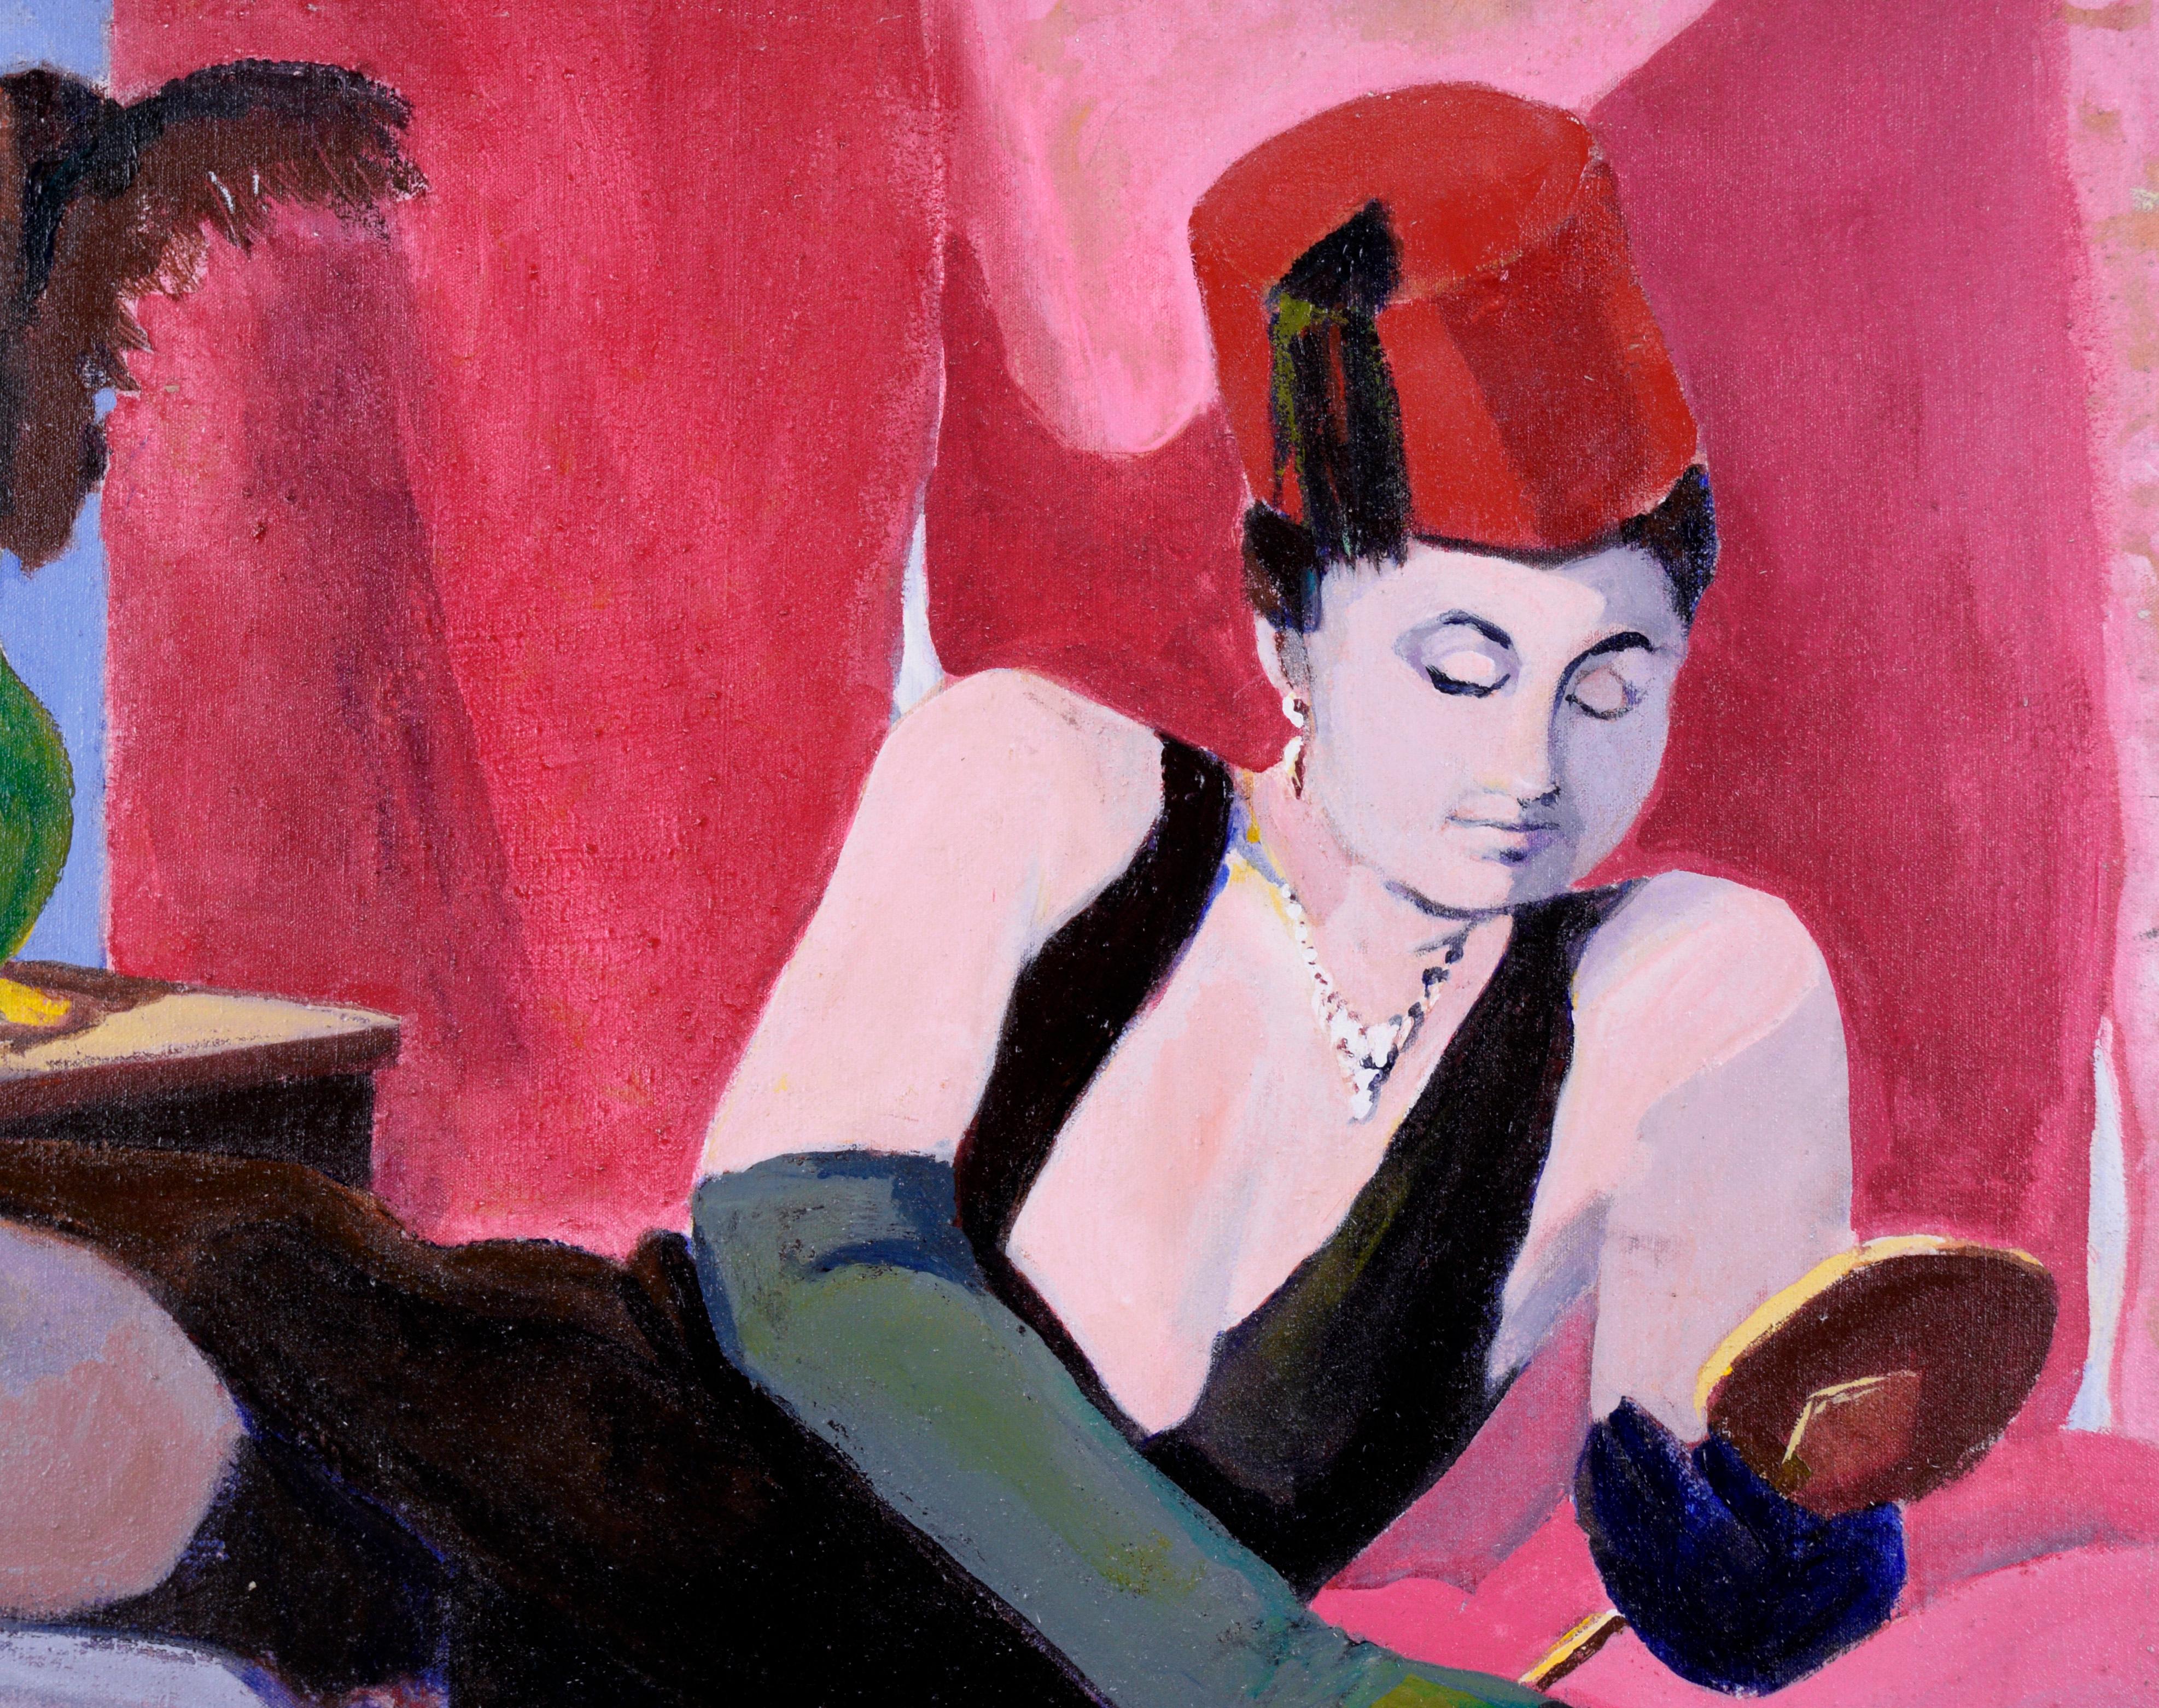 Woman in a Red Hat - Figurative Study Oil on Canvas - American Modern Painting by Patricia Gren Hayes